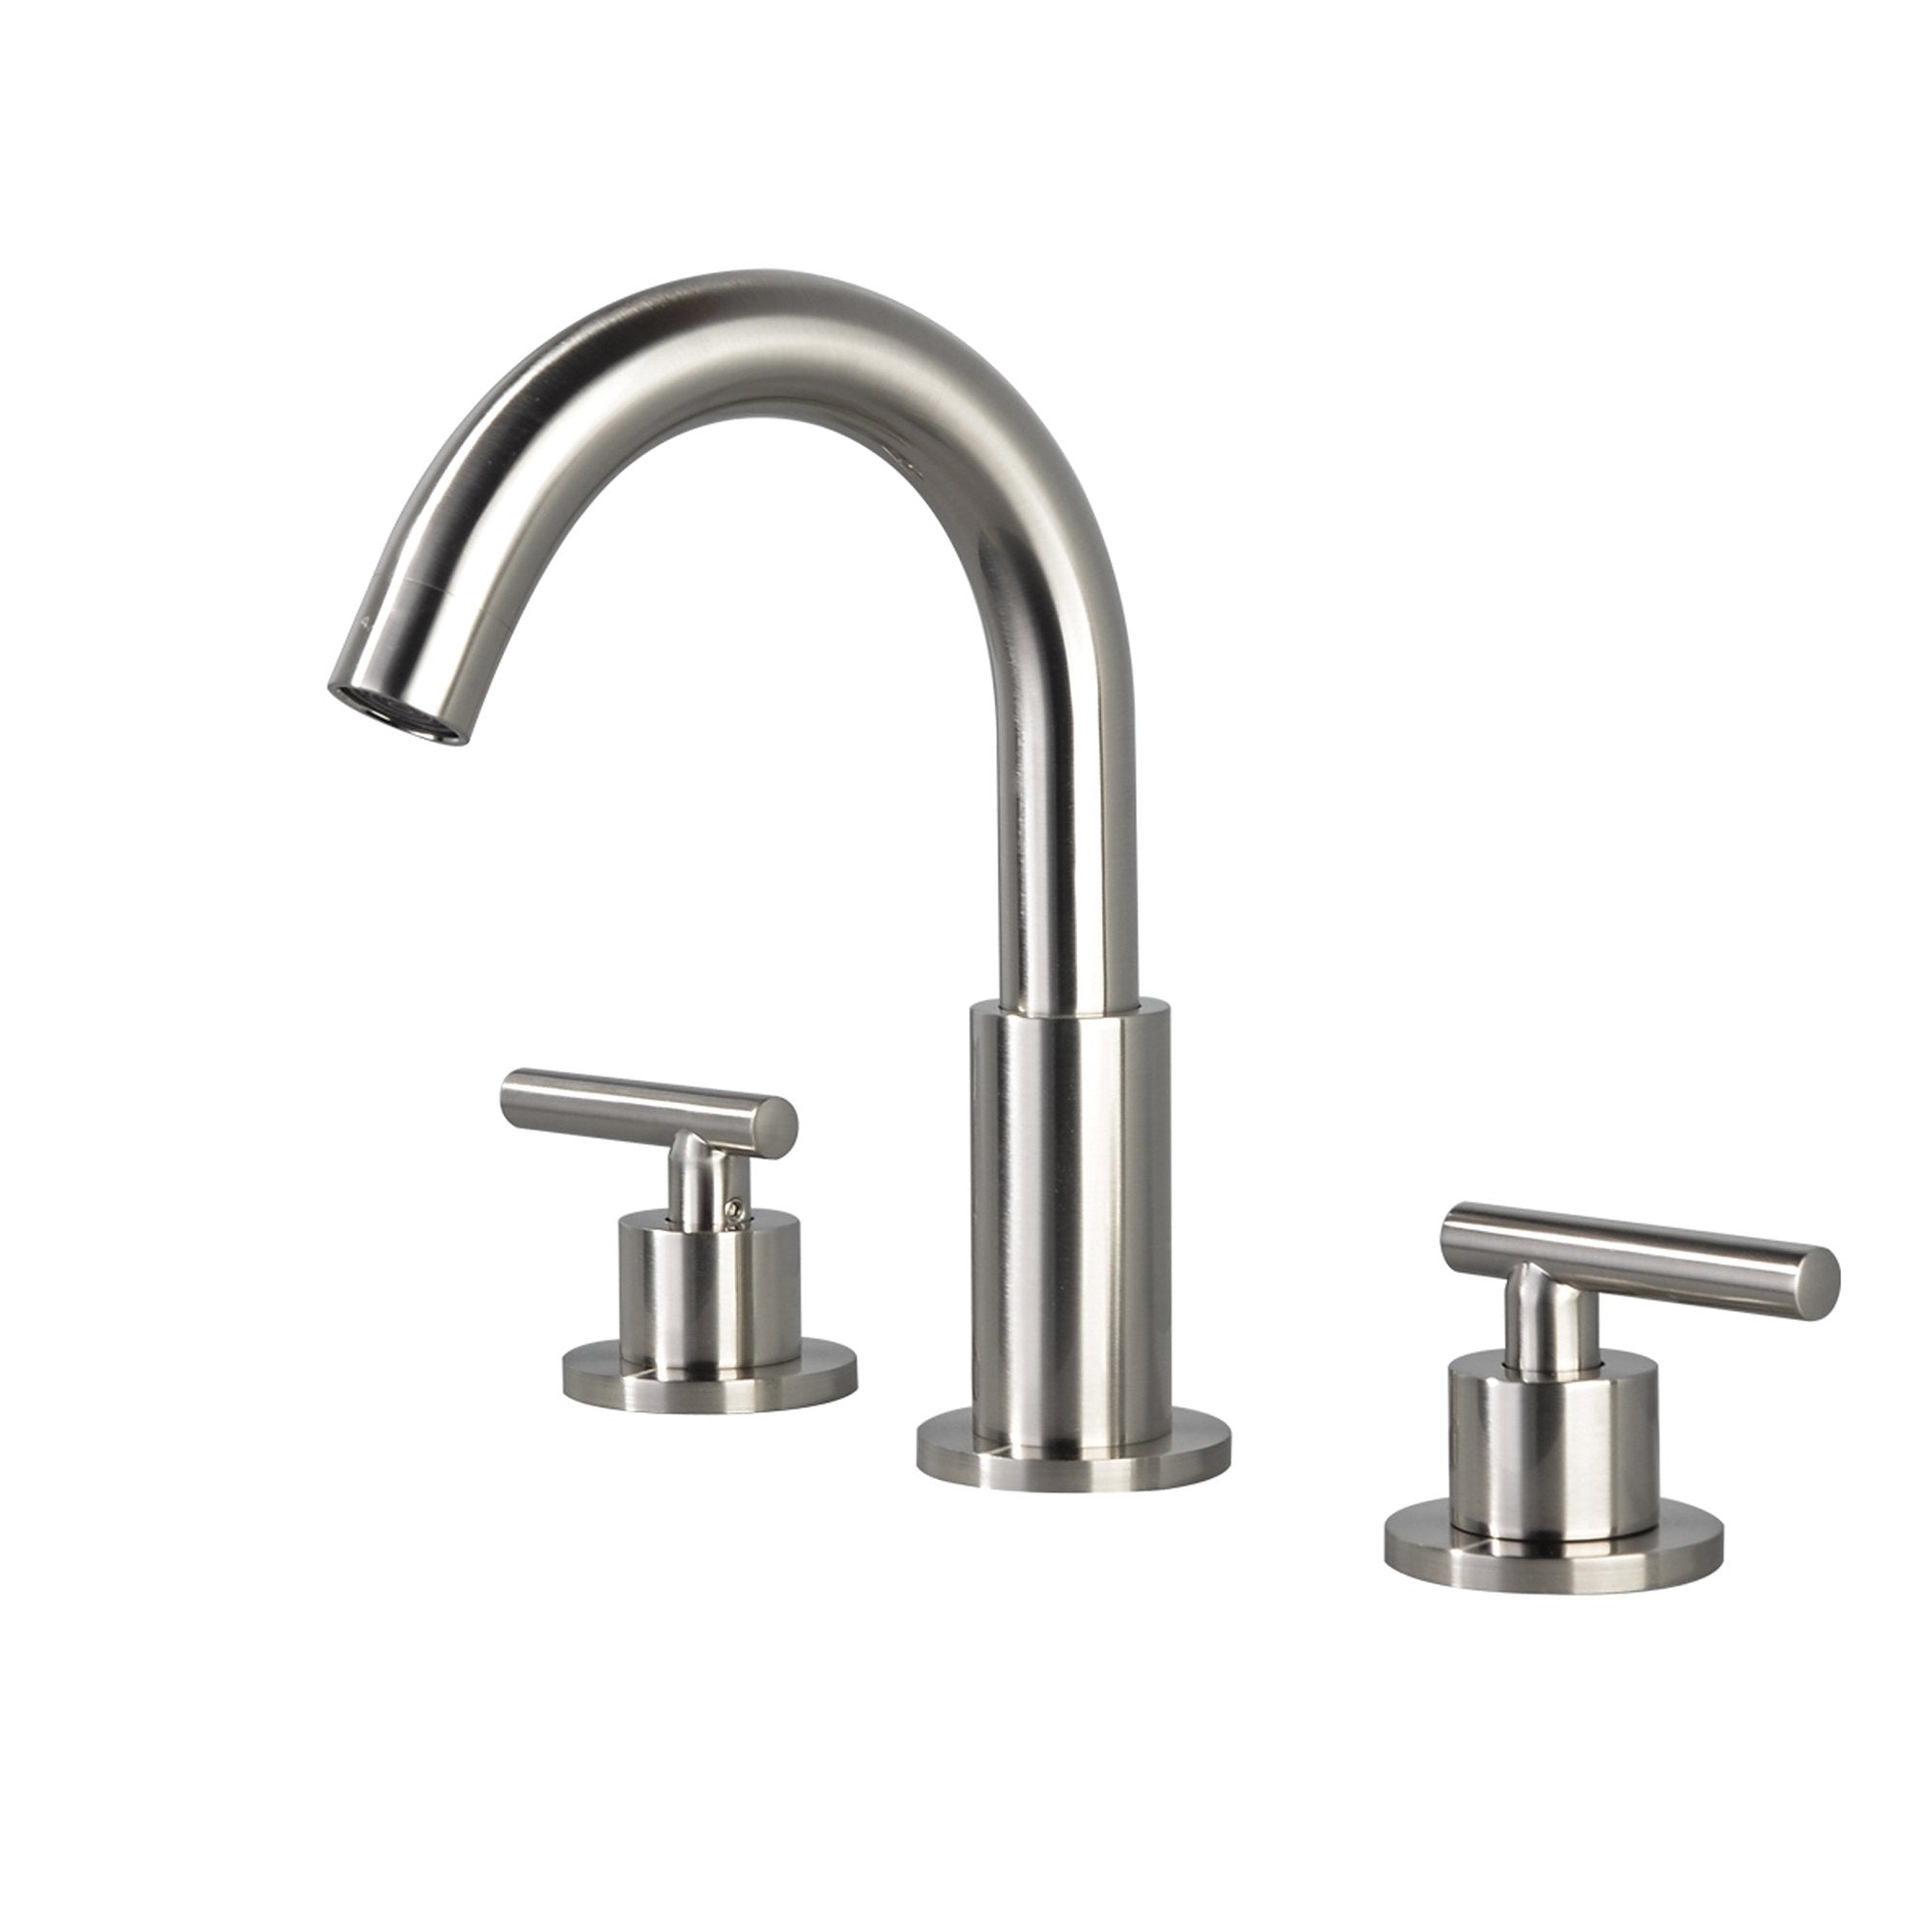 8 in. Widespread 2-Handle Mid-Arc Bathroom Faucet with Valve and cUPC Water Supply Lines in Brushed Nickel - Alipuinc